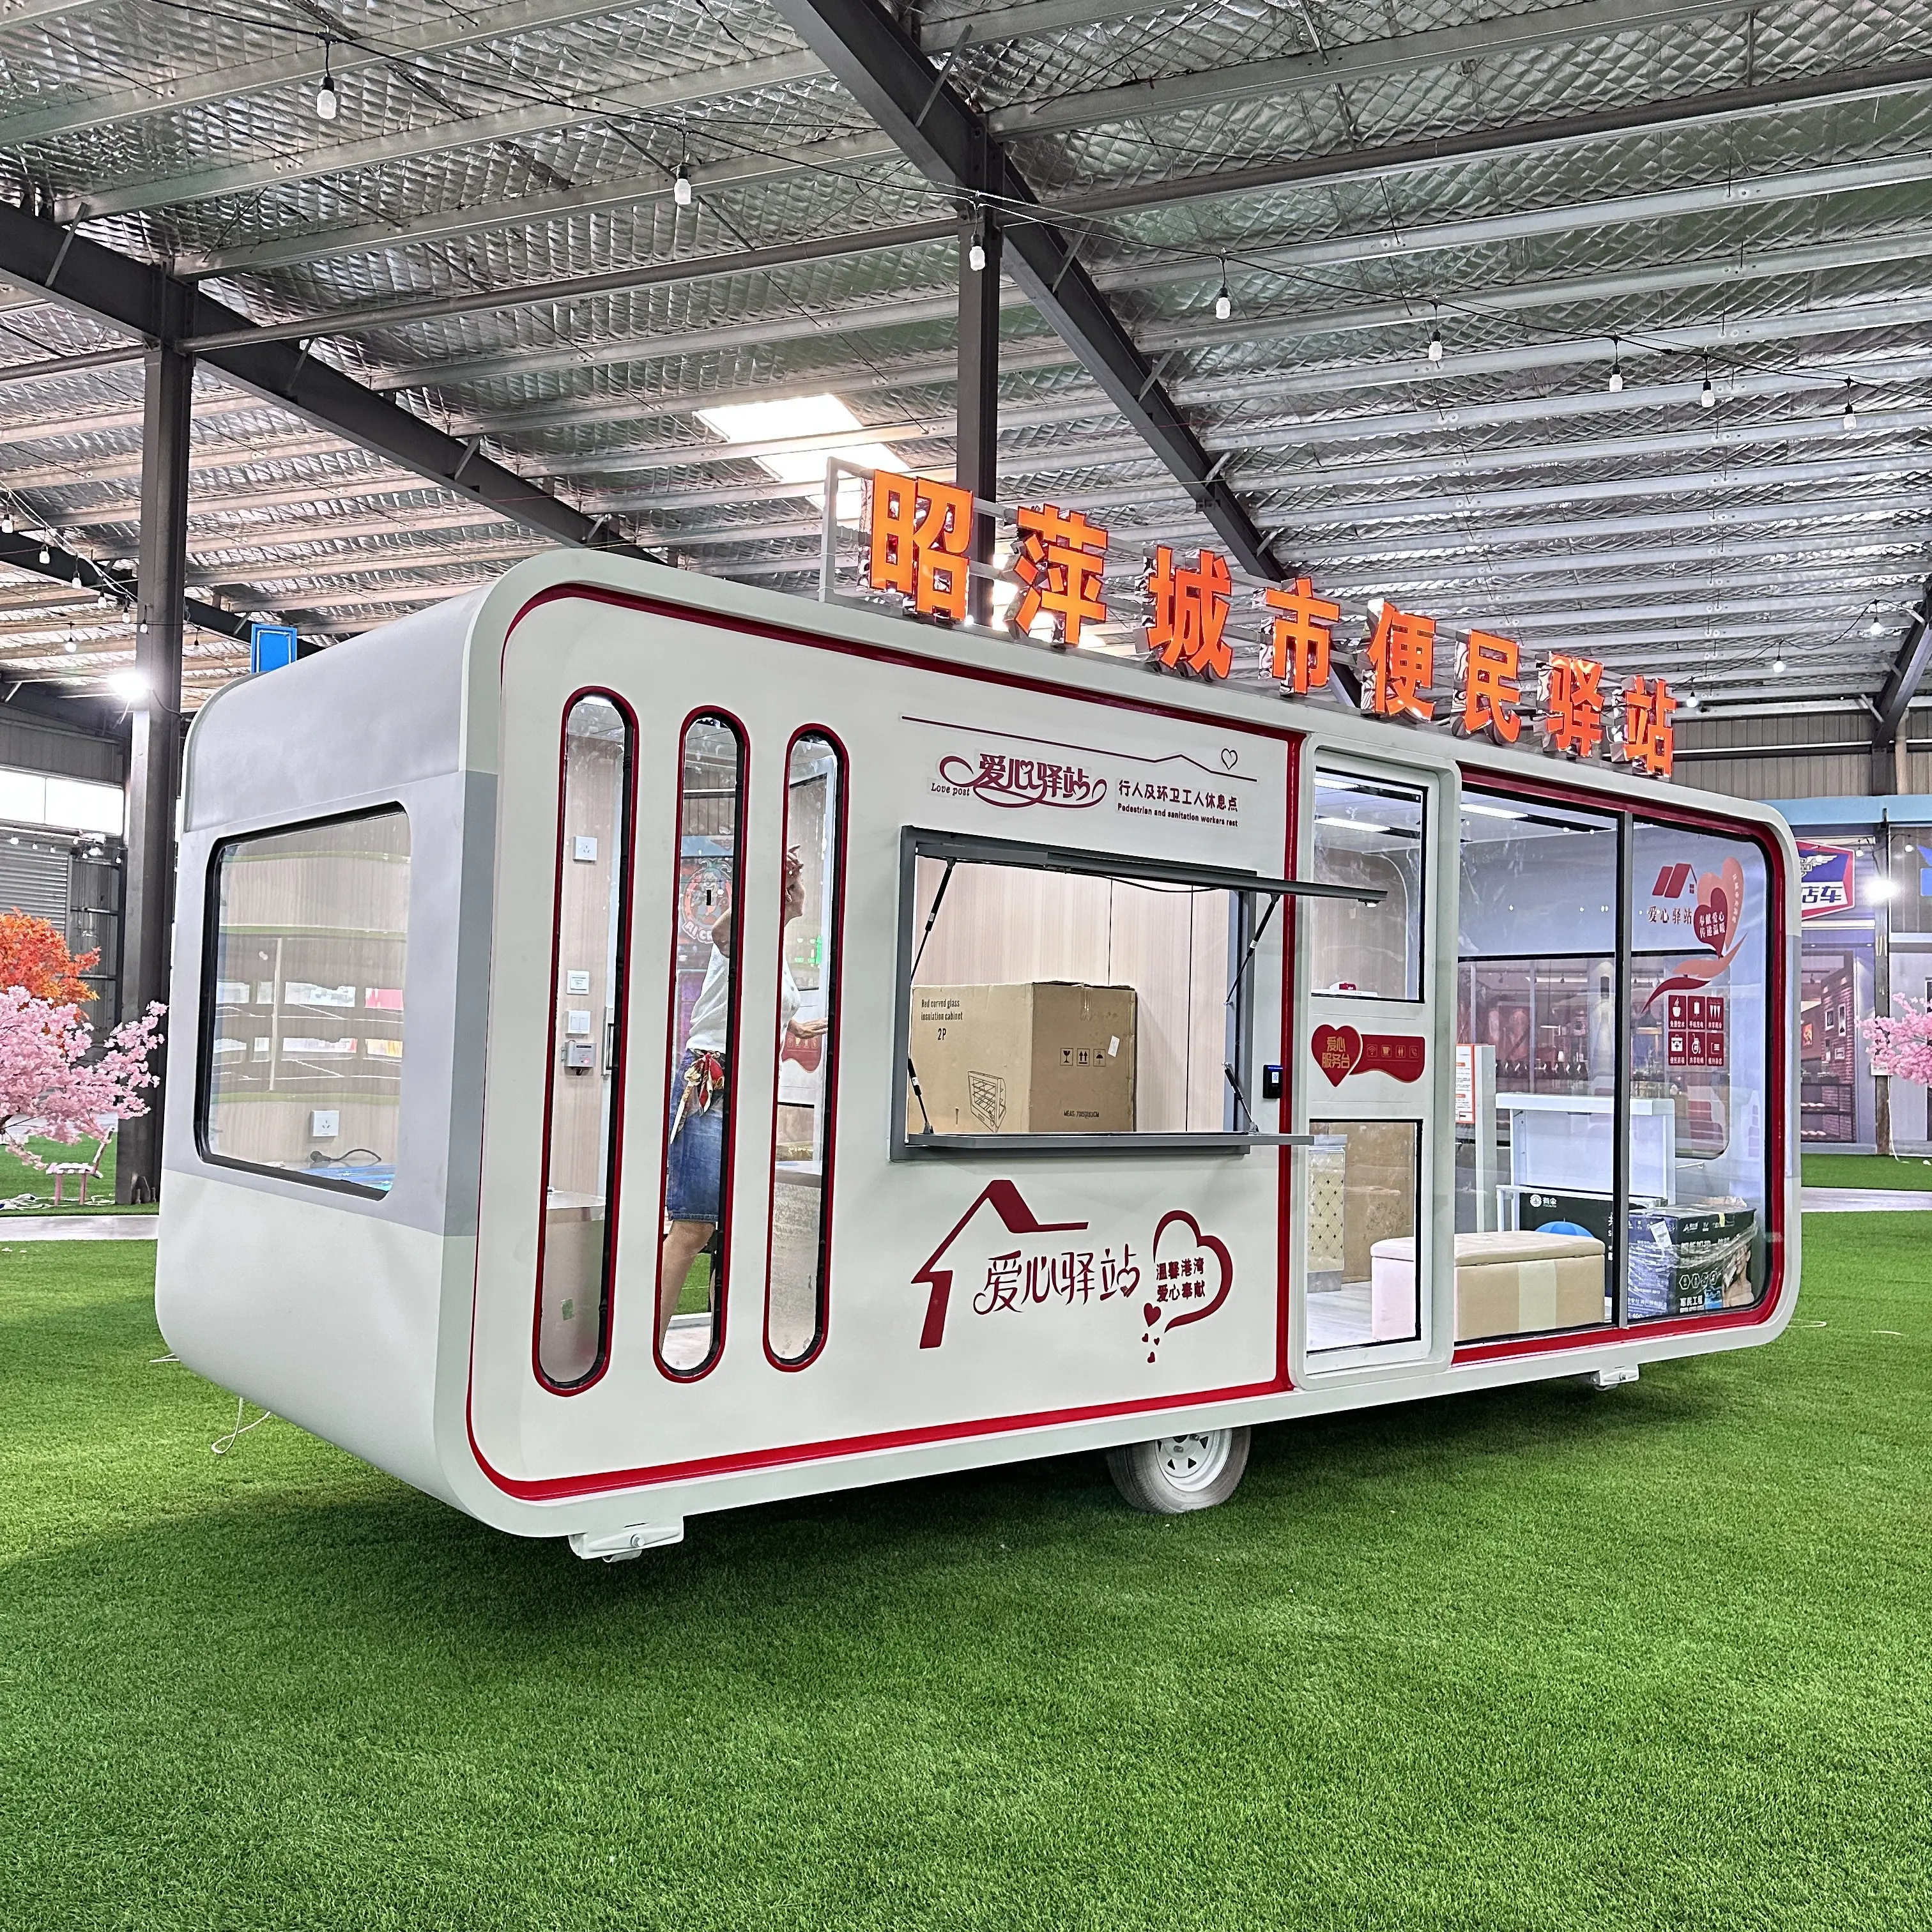 Best Selling Wholesale Street Mobile Food Trailer Lunch Wagons Coffee Kiosk With Wheels